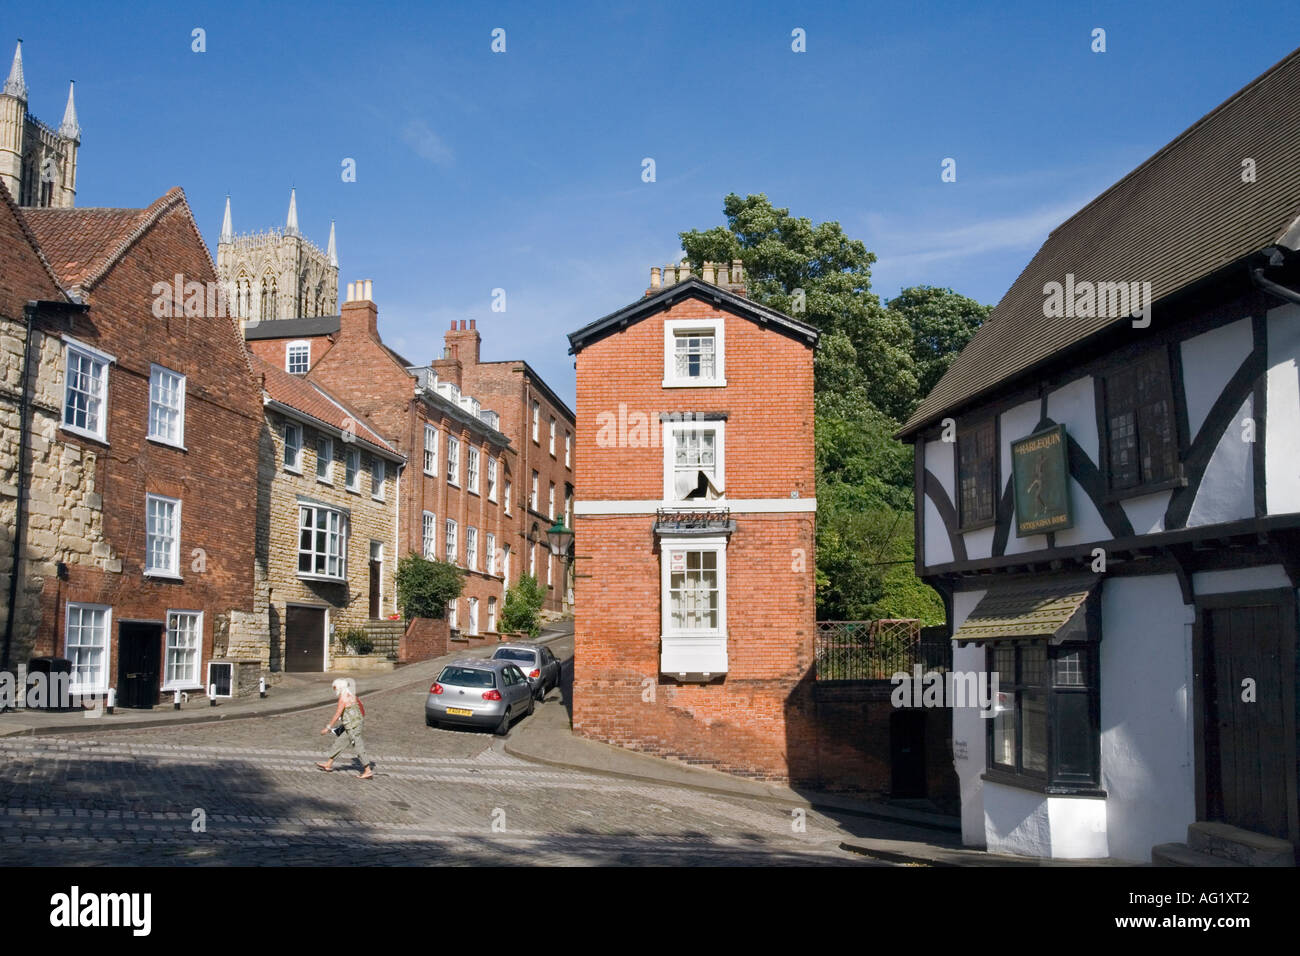 STEEP HILL LINCOLN IN JULY VIEWED FROM THE SIDE AT MICHAELGATE Stock Photo